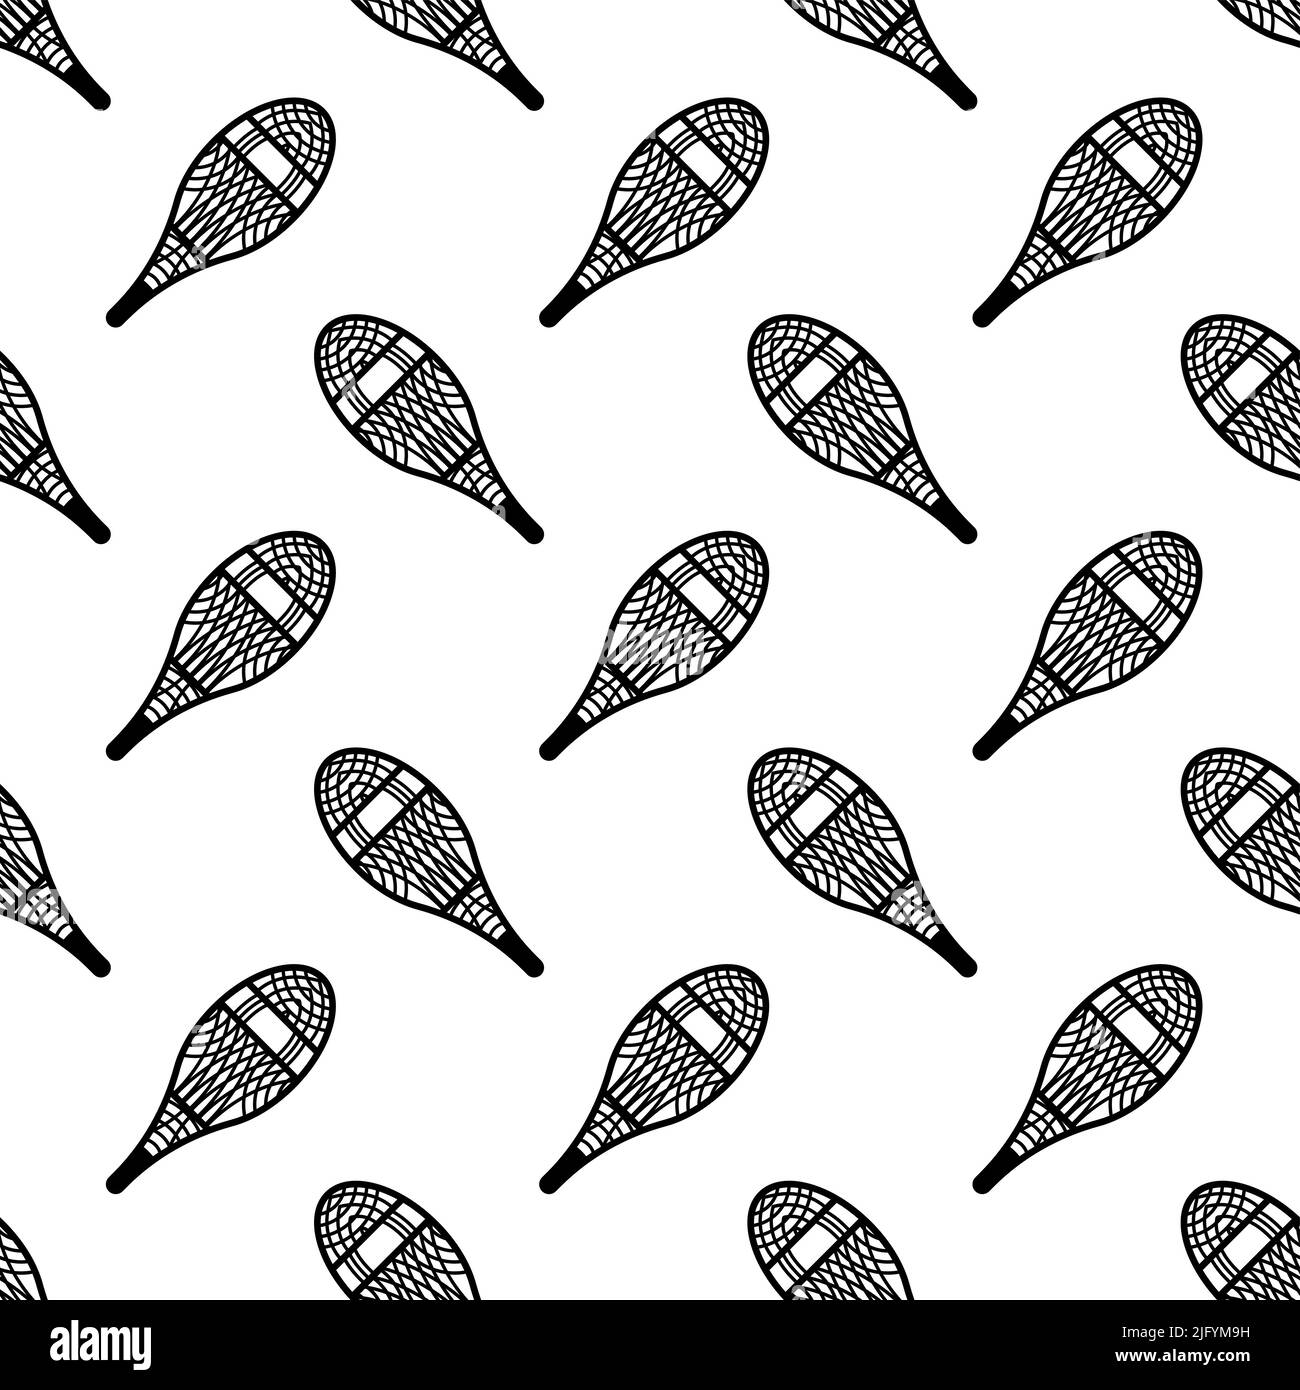 Traditional Snowshoes Icon Seamless Pattern, Winter Snow Equipment Vector Art Illustration Stock Vector